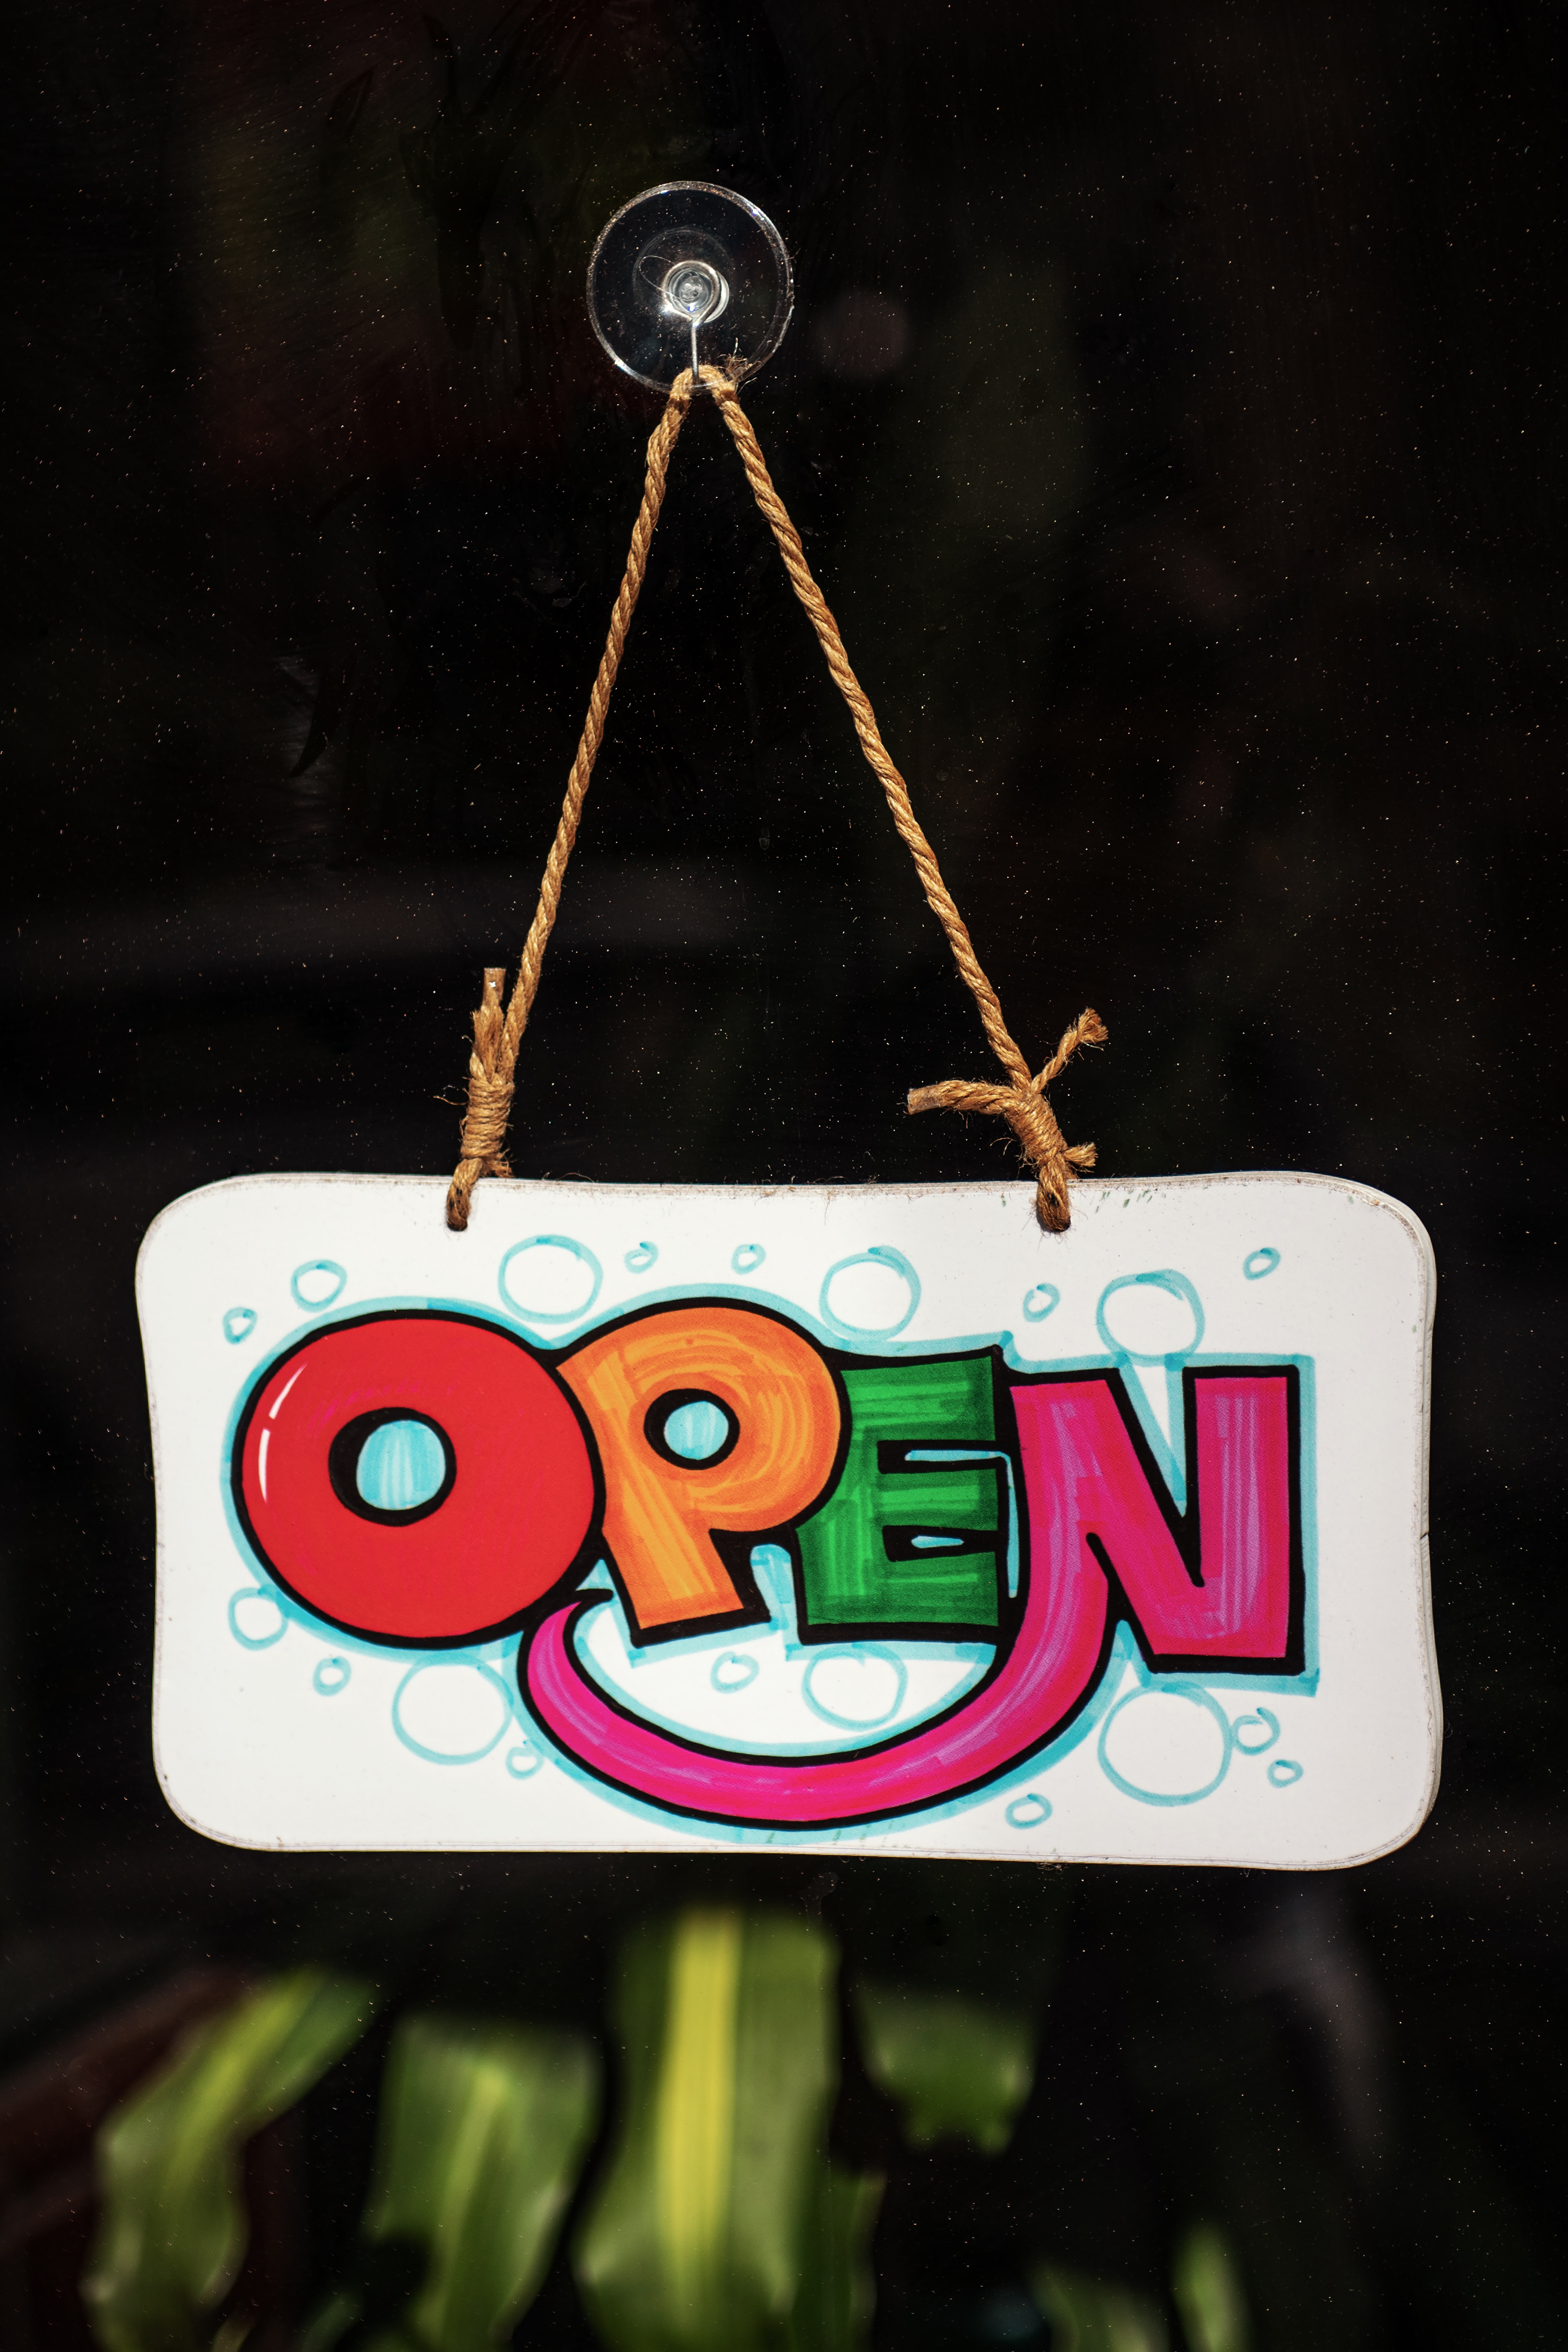 motley, inscription, words, multicolored, text, sign, signboard, open, it's open